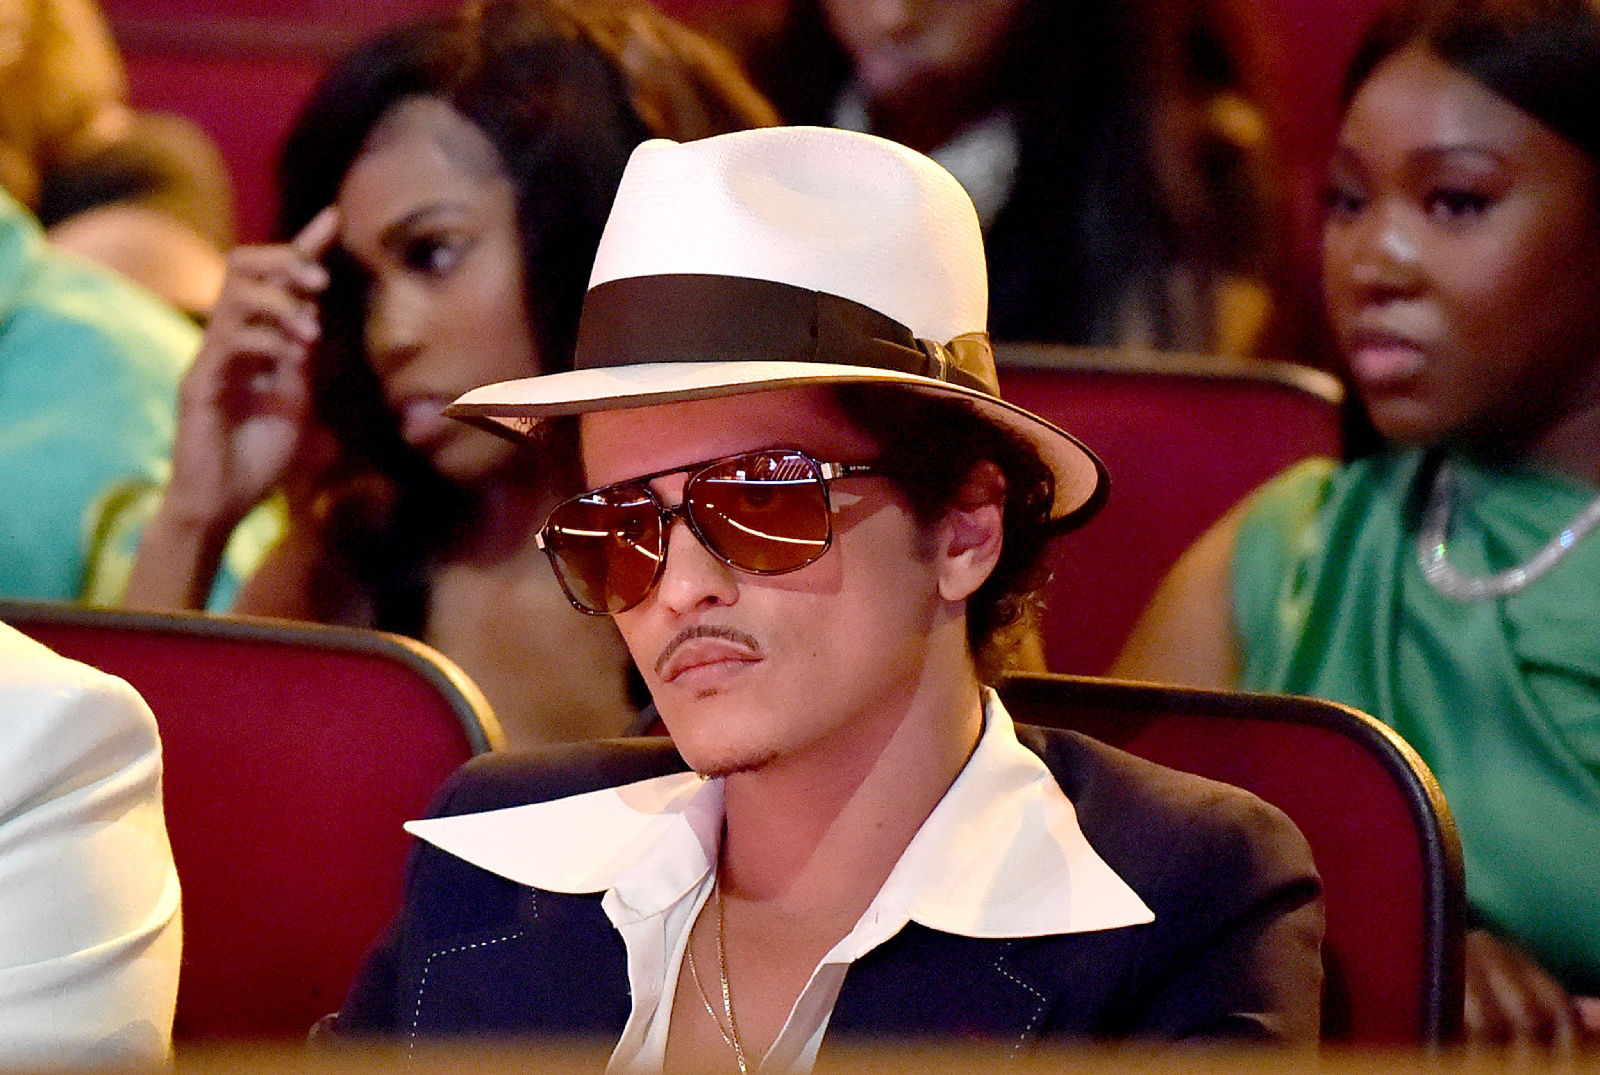 HOT Outrage to report that Bruno Mars has 50M in